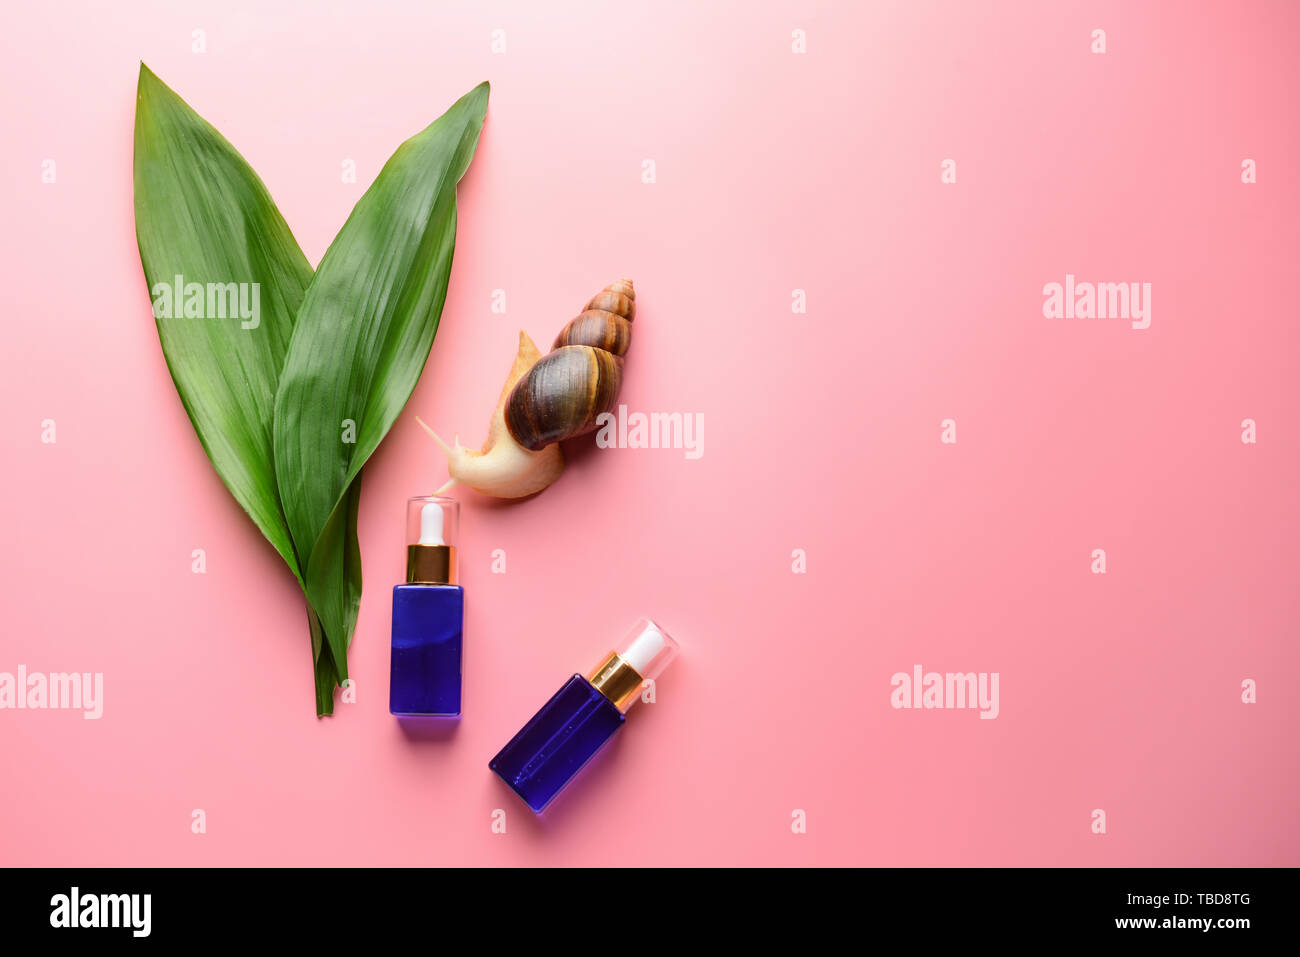 Giant Achatina snail and cosmetics on color background Stock Photo